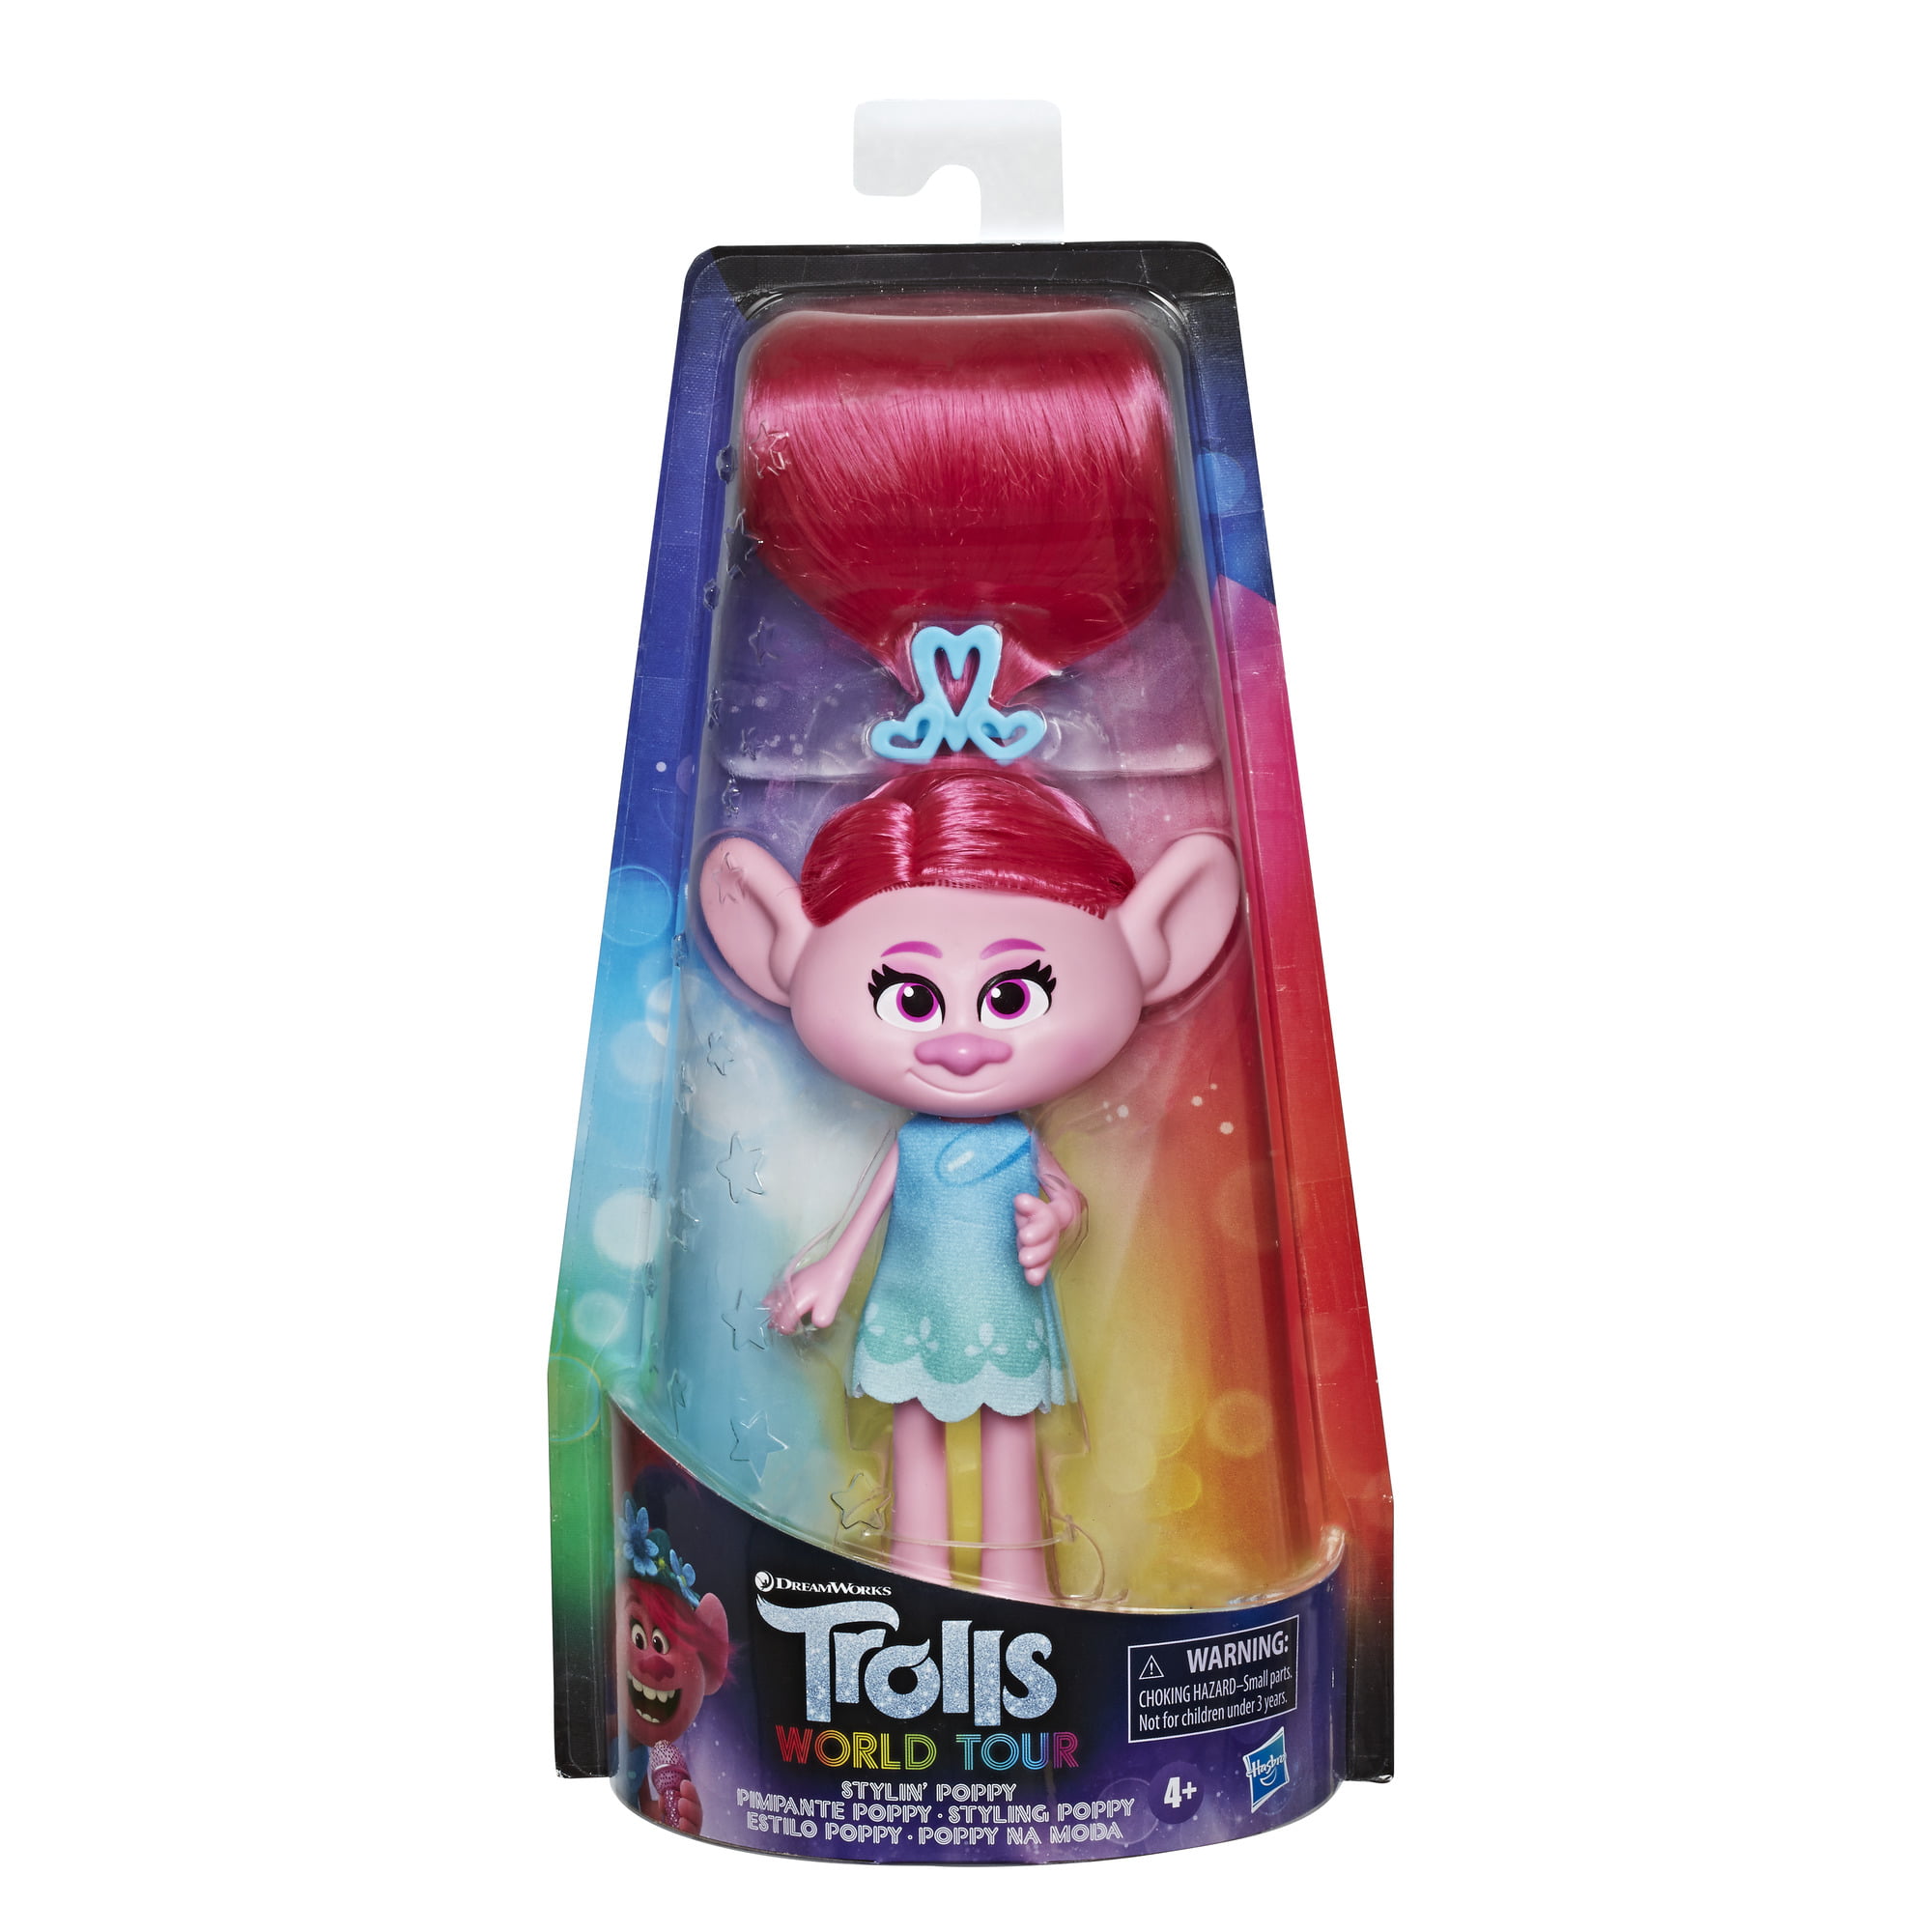 1/2/4/8/12 x HASBRO DREAMWORKS TROLLS ACTION FIGURE COLLECTABLE KIDS TOYS DOLLS 